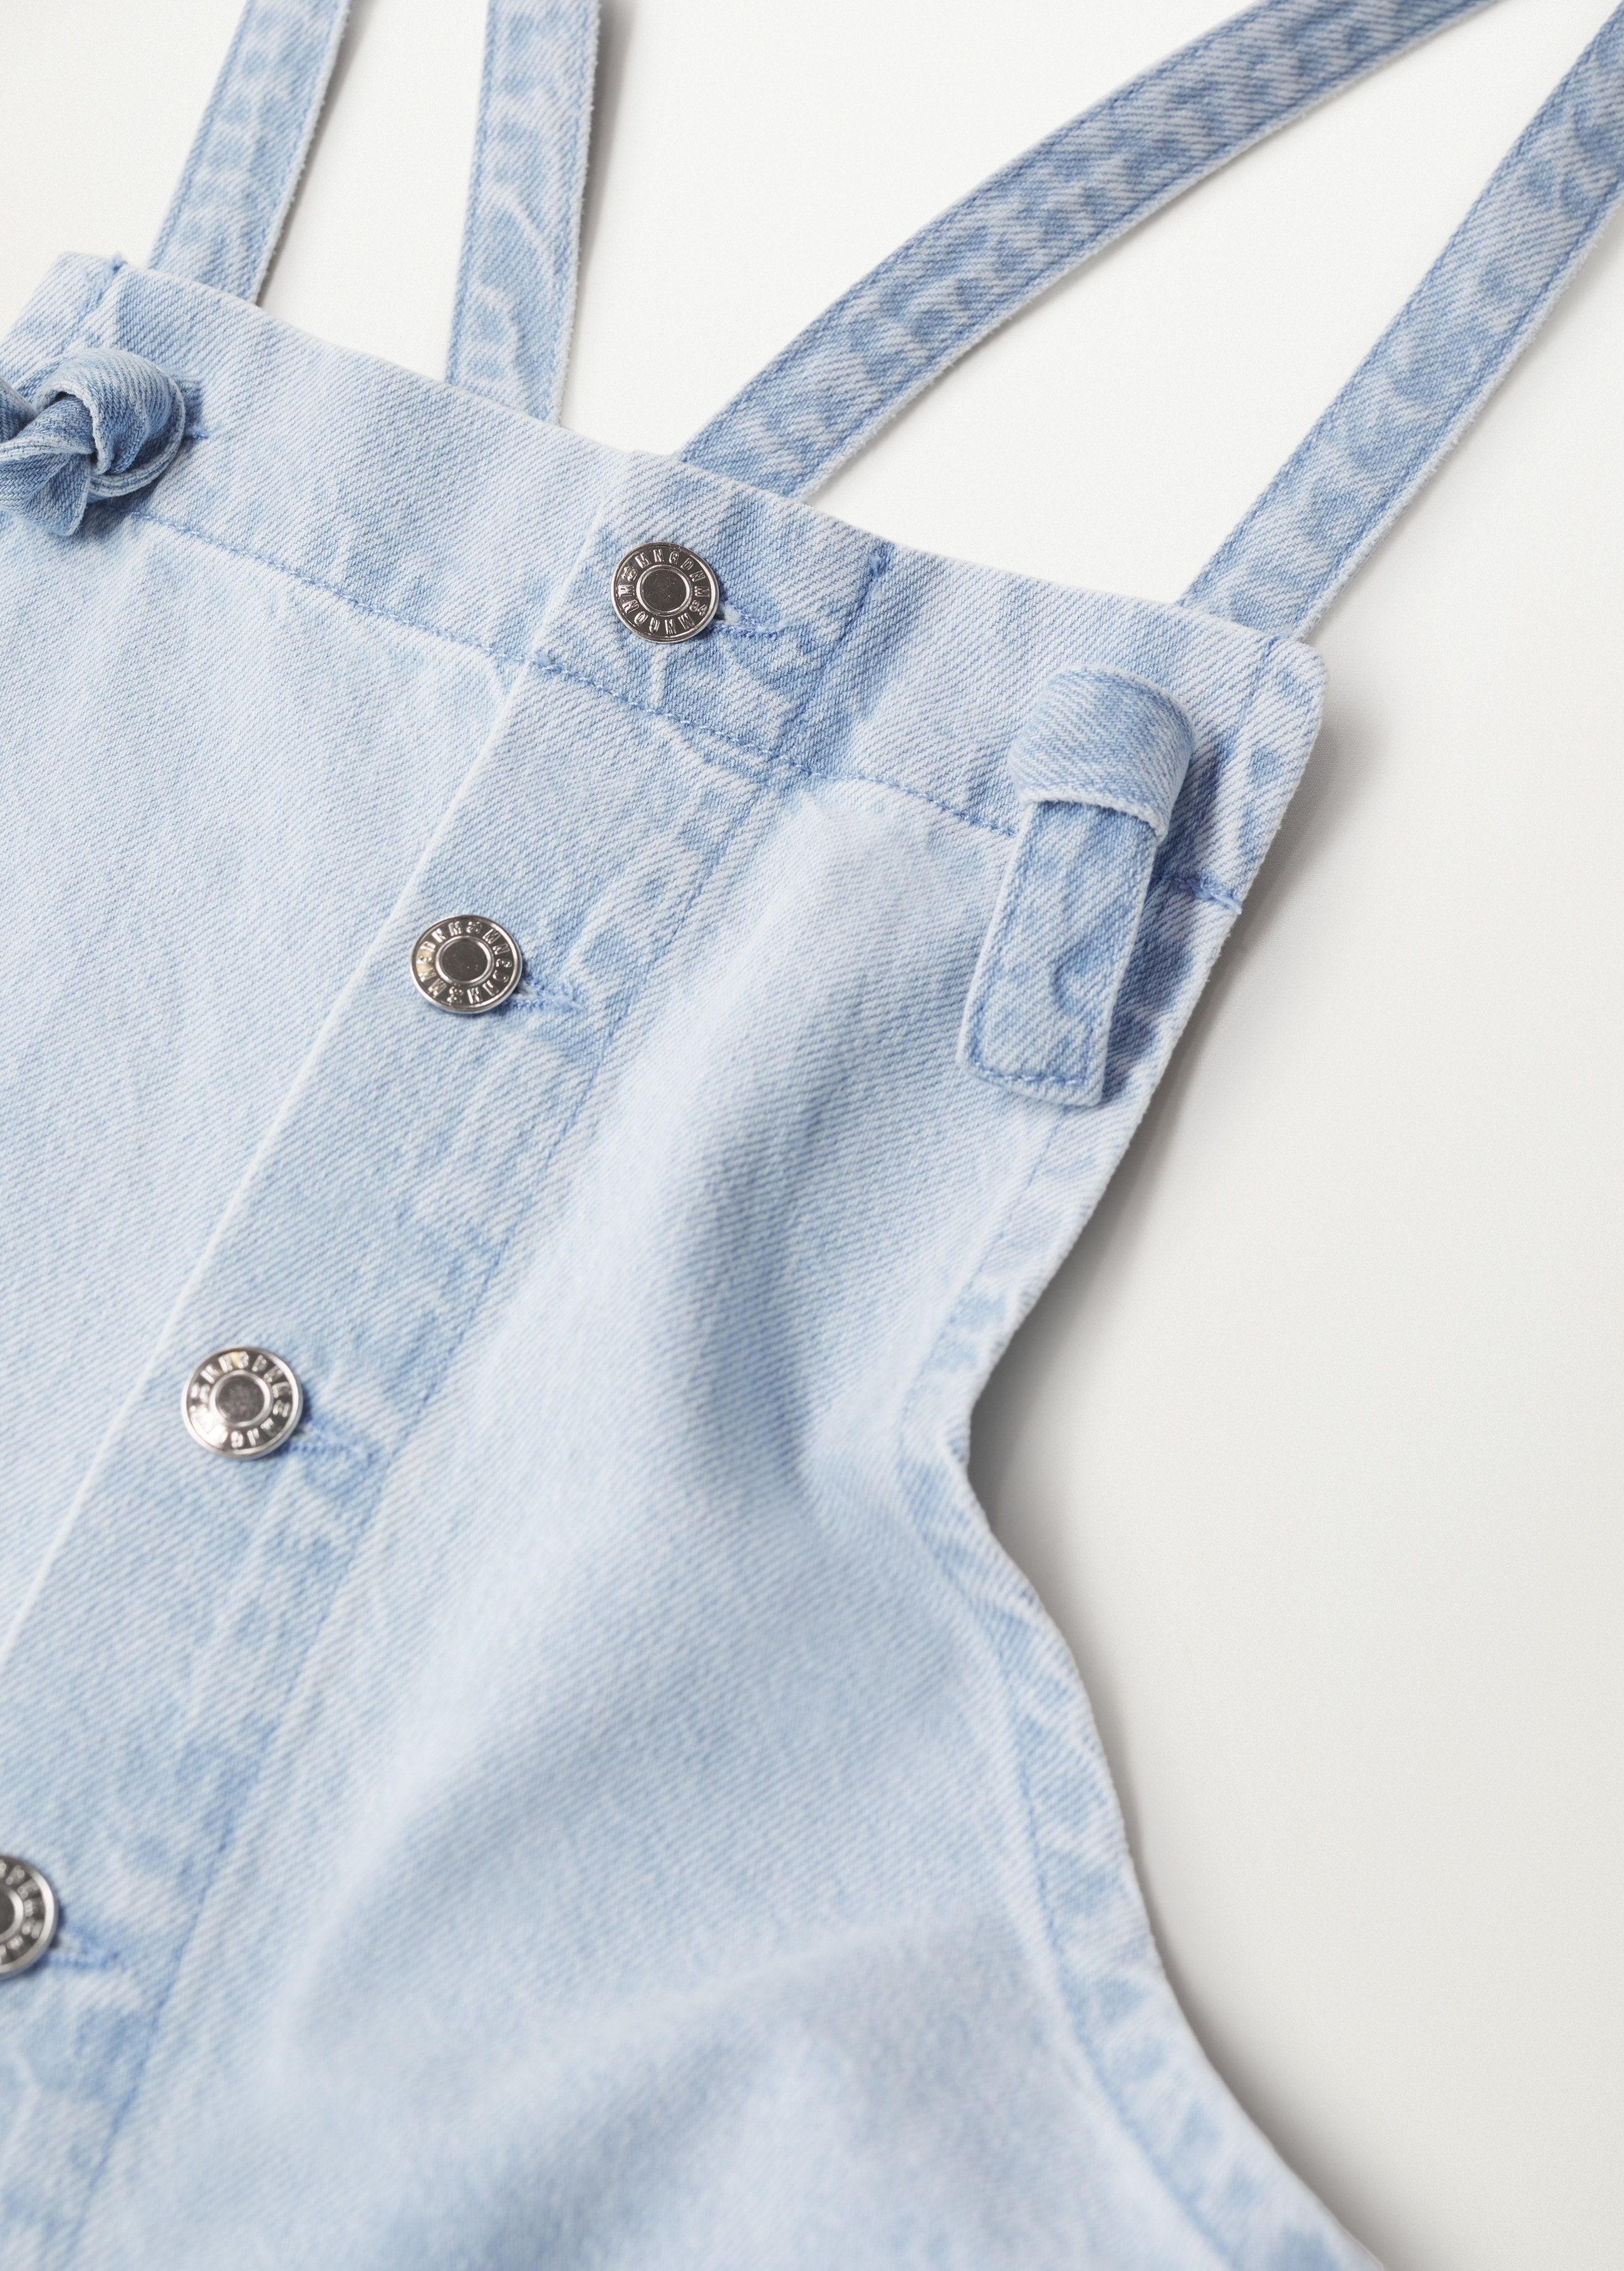 Lined denim dungarees - Details of the article 8